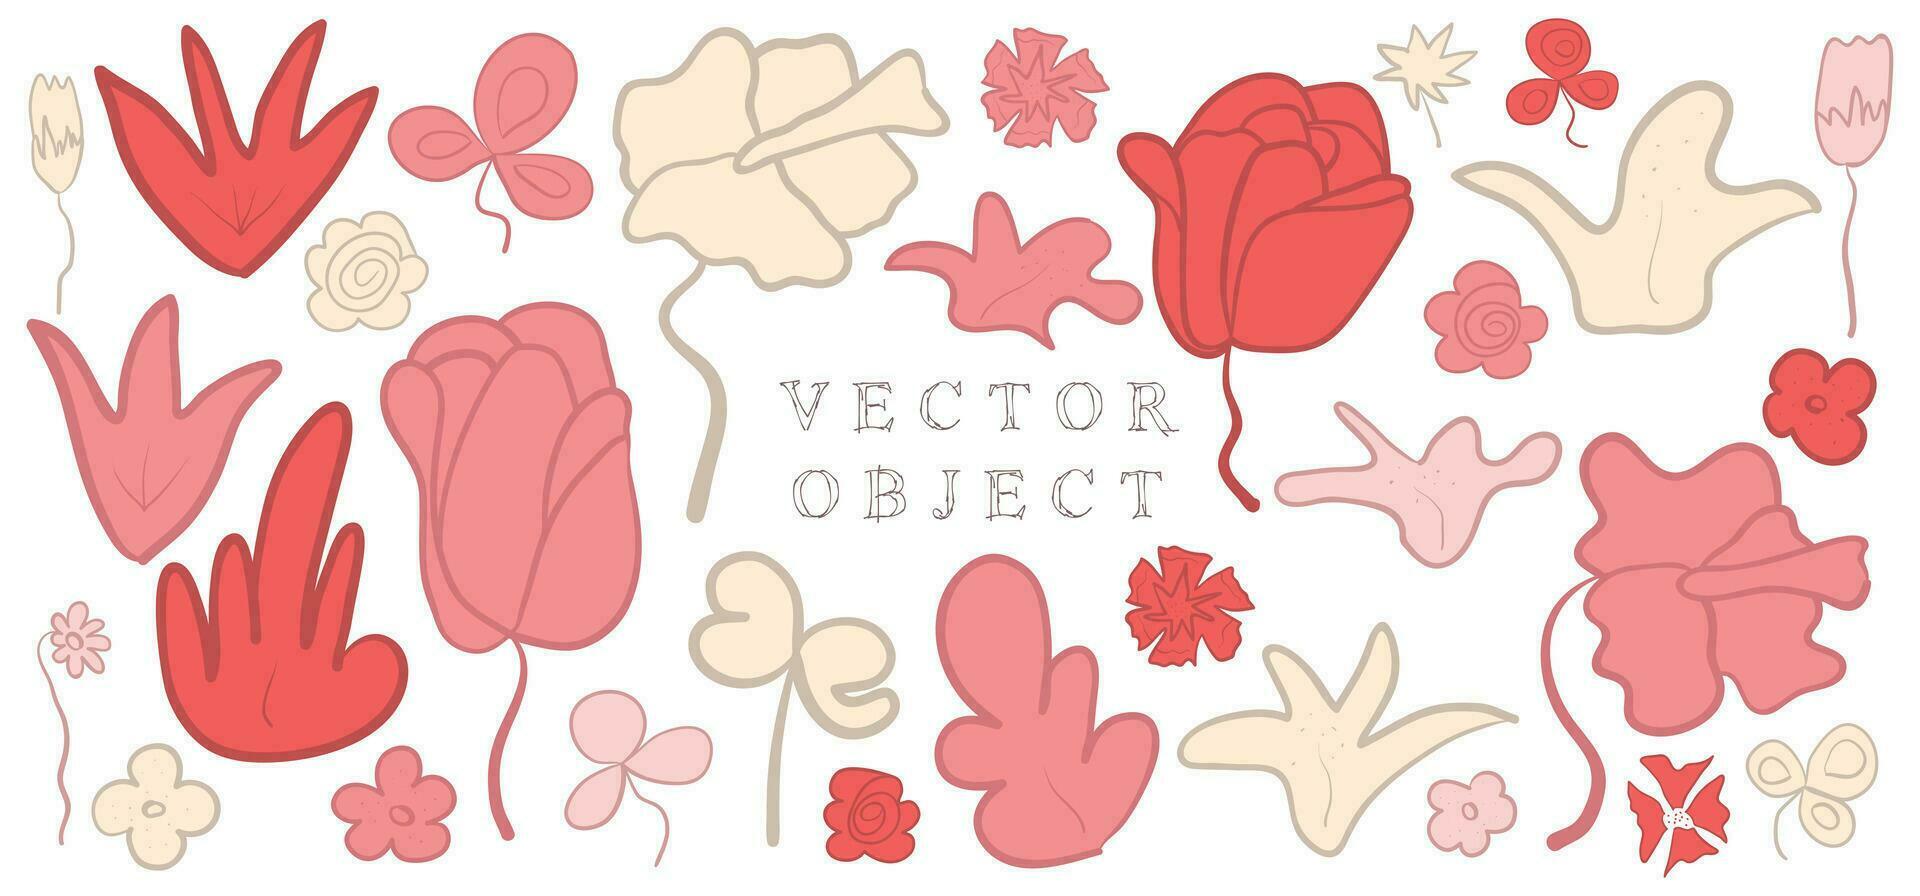 Handmade products. Completely vector and different. This elements that can be used to create any design. Vector brush type object